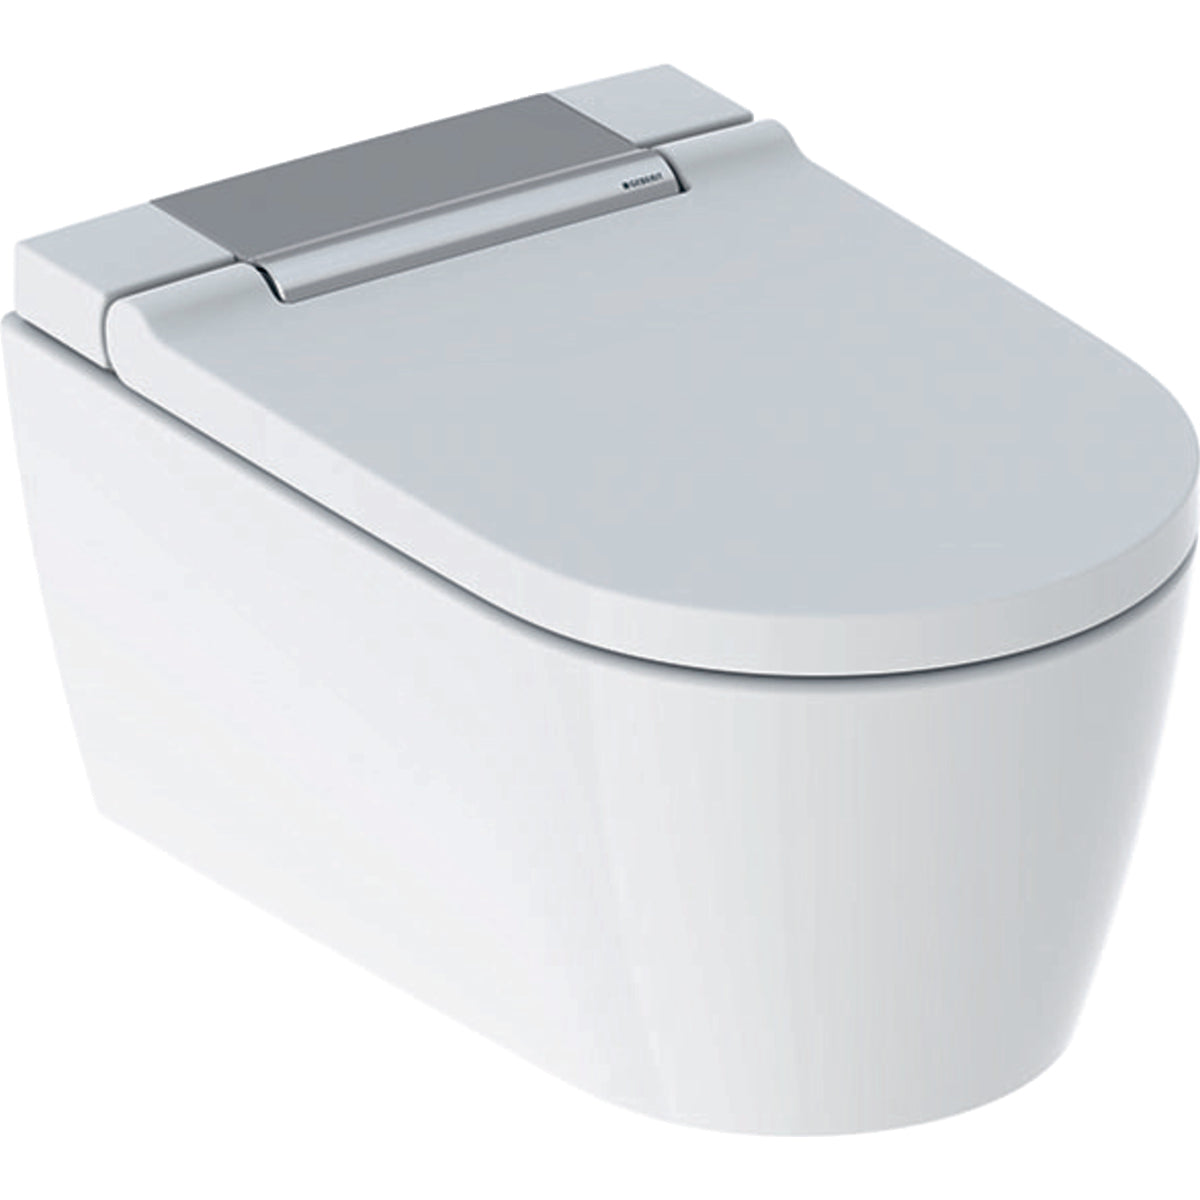 Geberit AquaClean Sela Rimless Wall Mounted Shower WC With Soft Close Toilet Seat